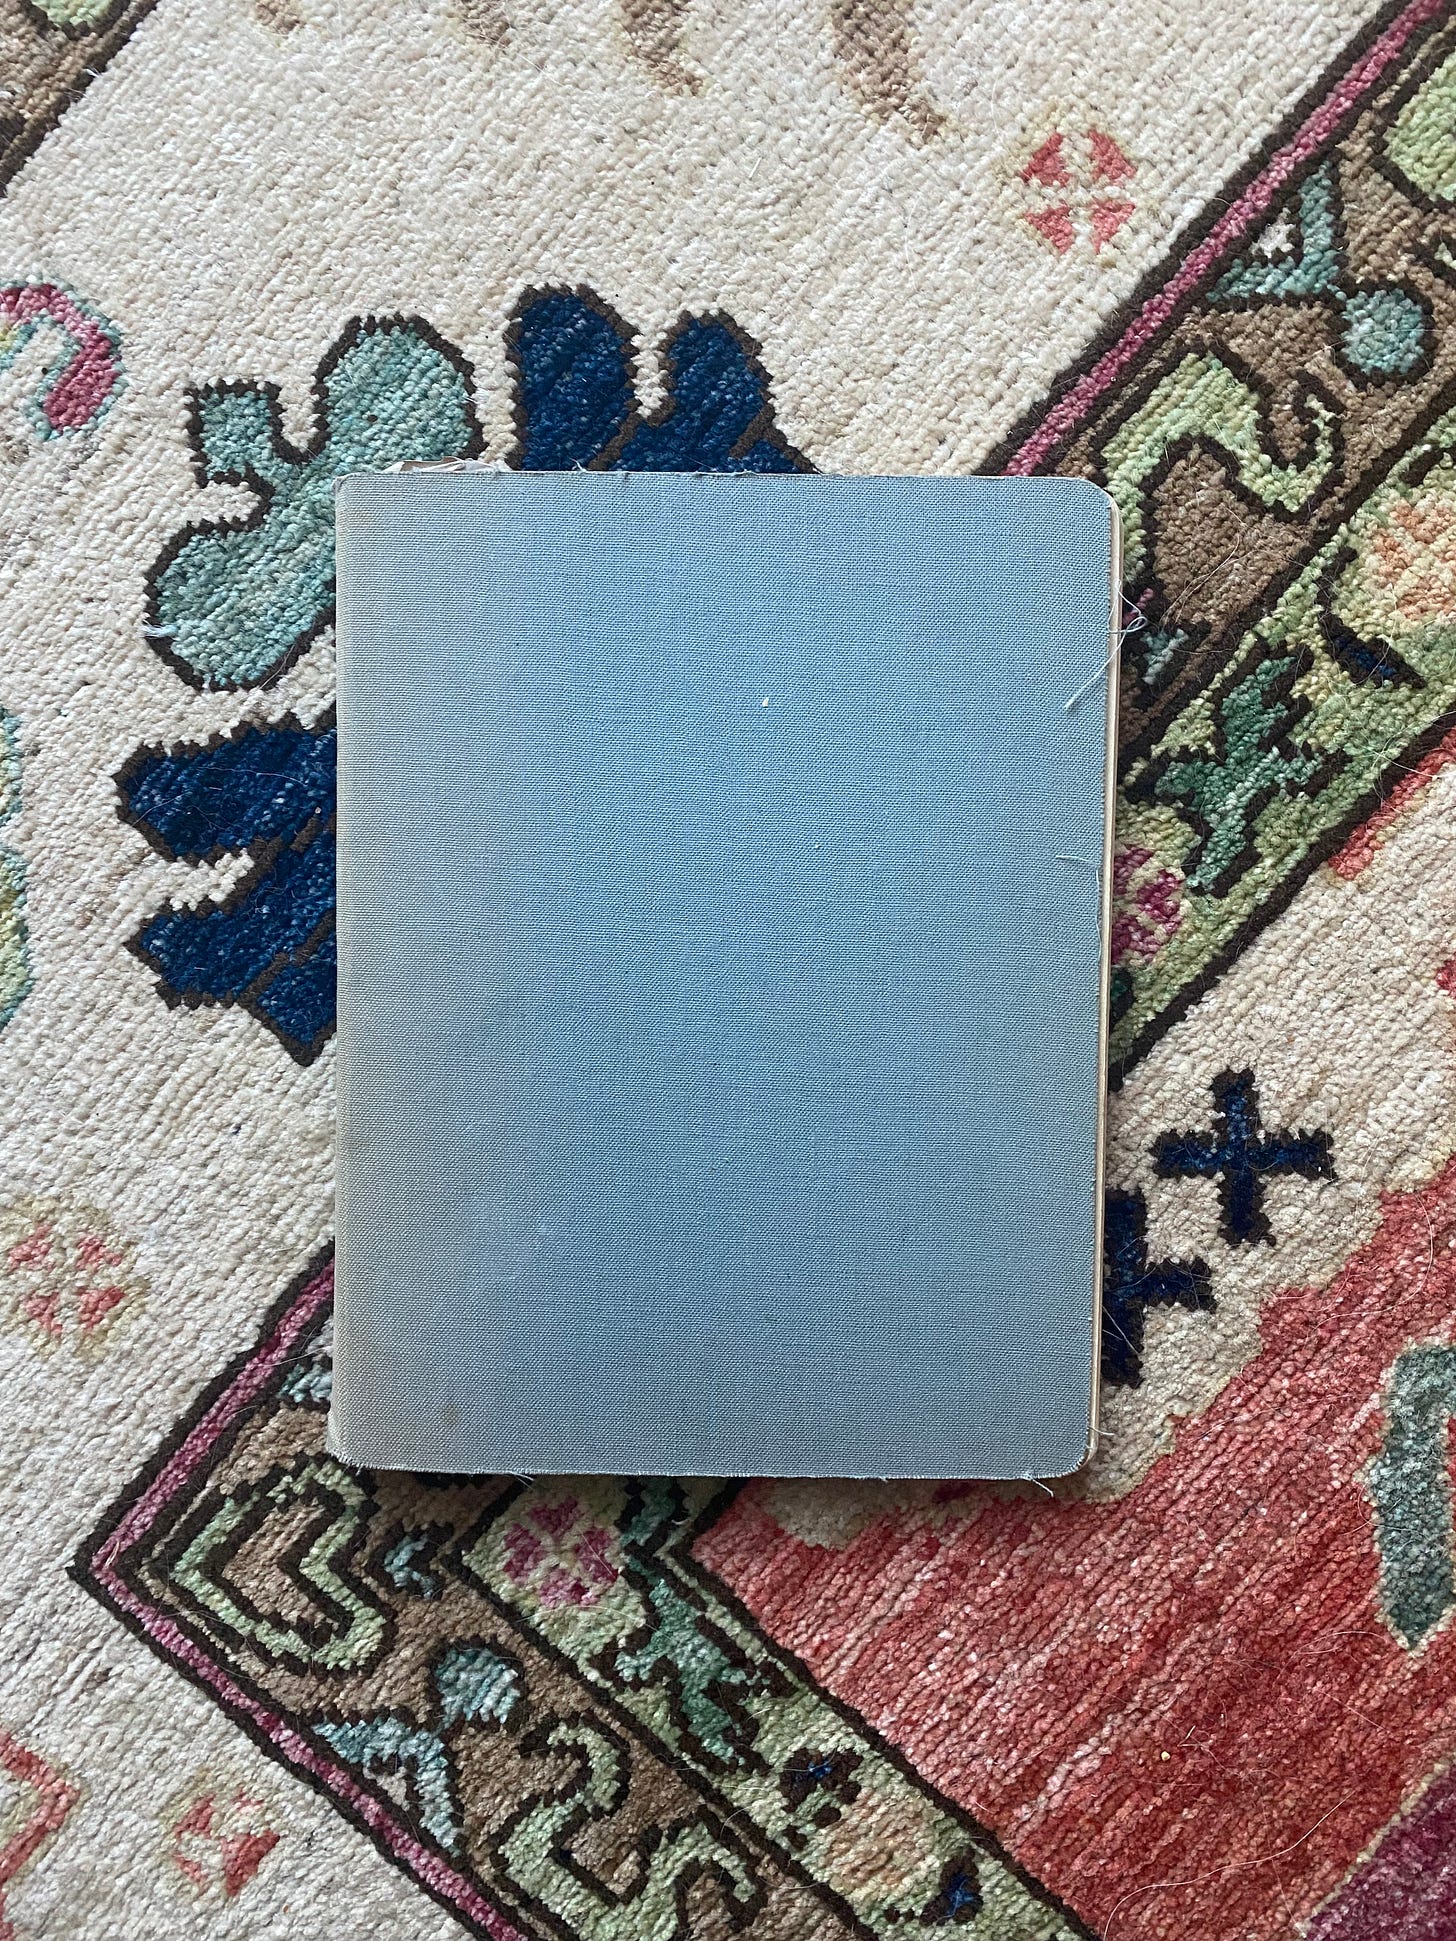 Photo of a faded blue hardcover notebook on a rug